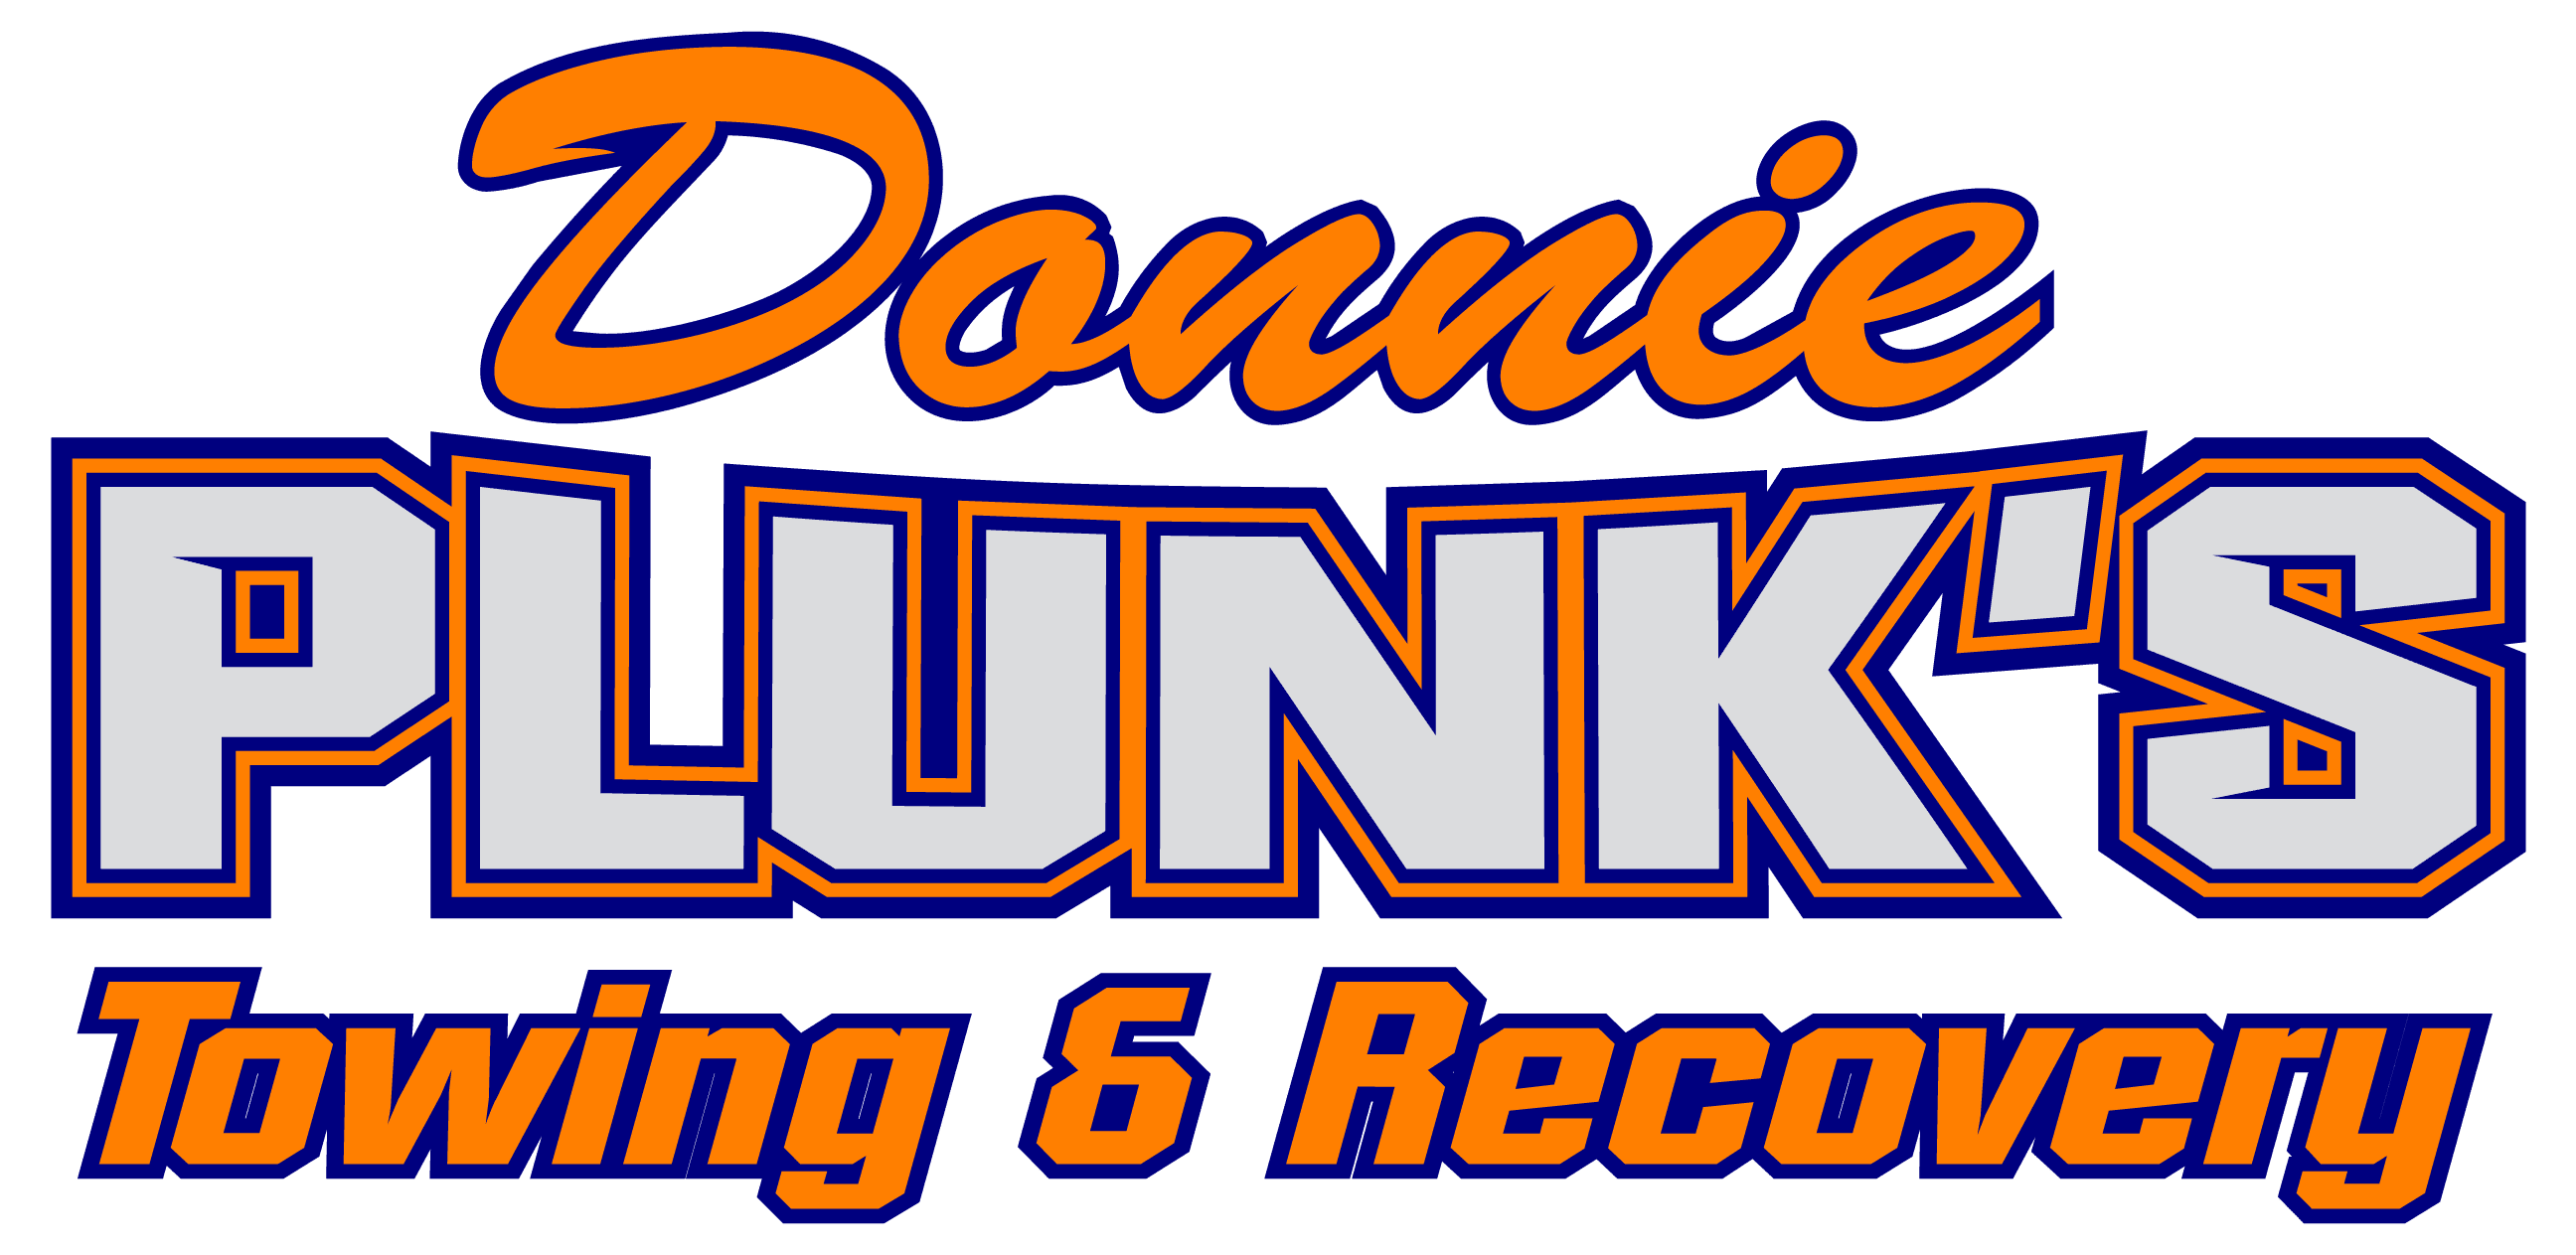 Donnie Plunk's Towing & Recovery